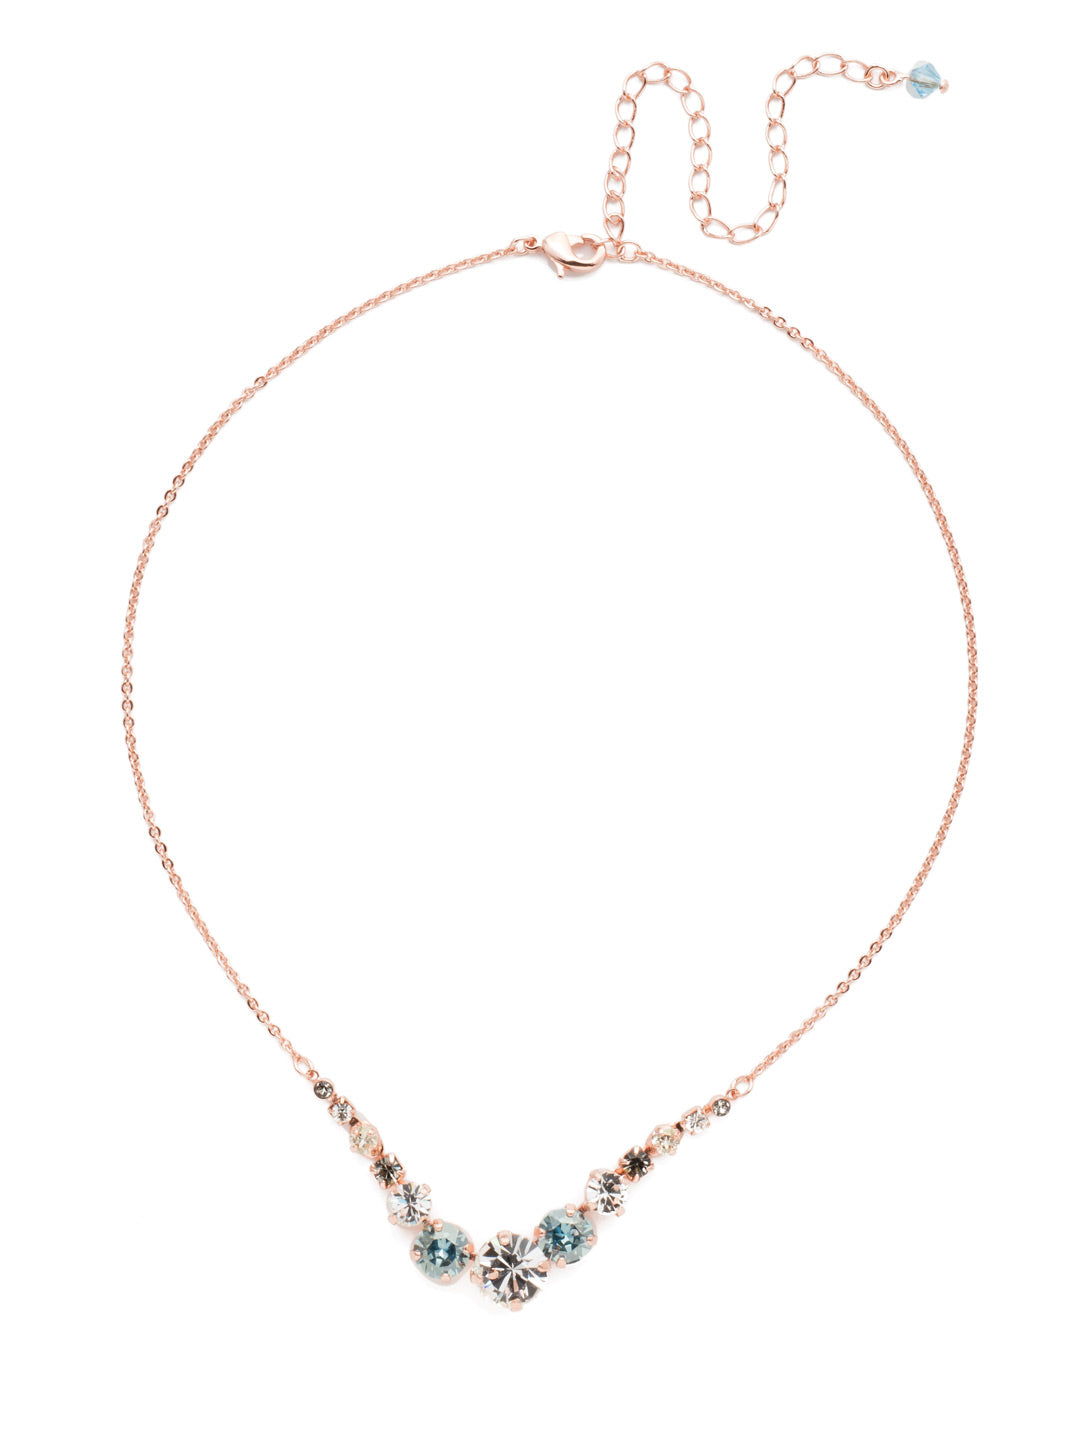 London Tennis Necklace - NCQ14RGCAZ - A long, simple chain paired with gorgeous round stones is exactly what every girl needs to dress things up. This round stone necklace is perfect for layering, or to just wear alone. Let the simple sparkle take over. From Sorrelli's Crystal Azure collection in our Rose Gold-tone finish.